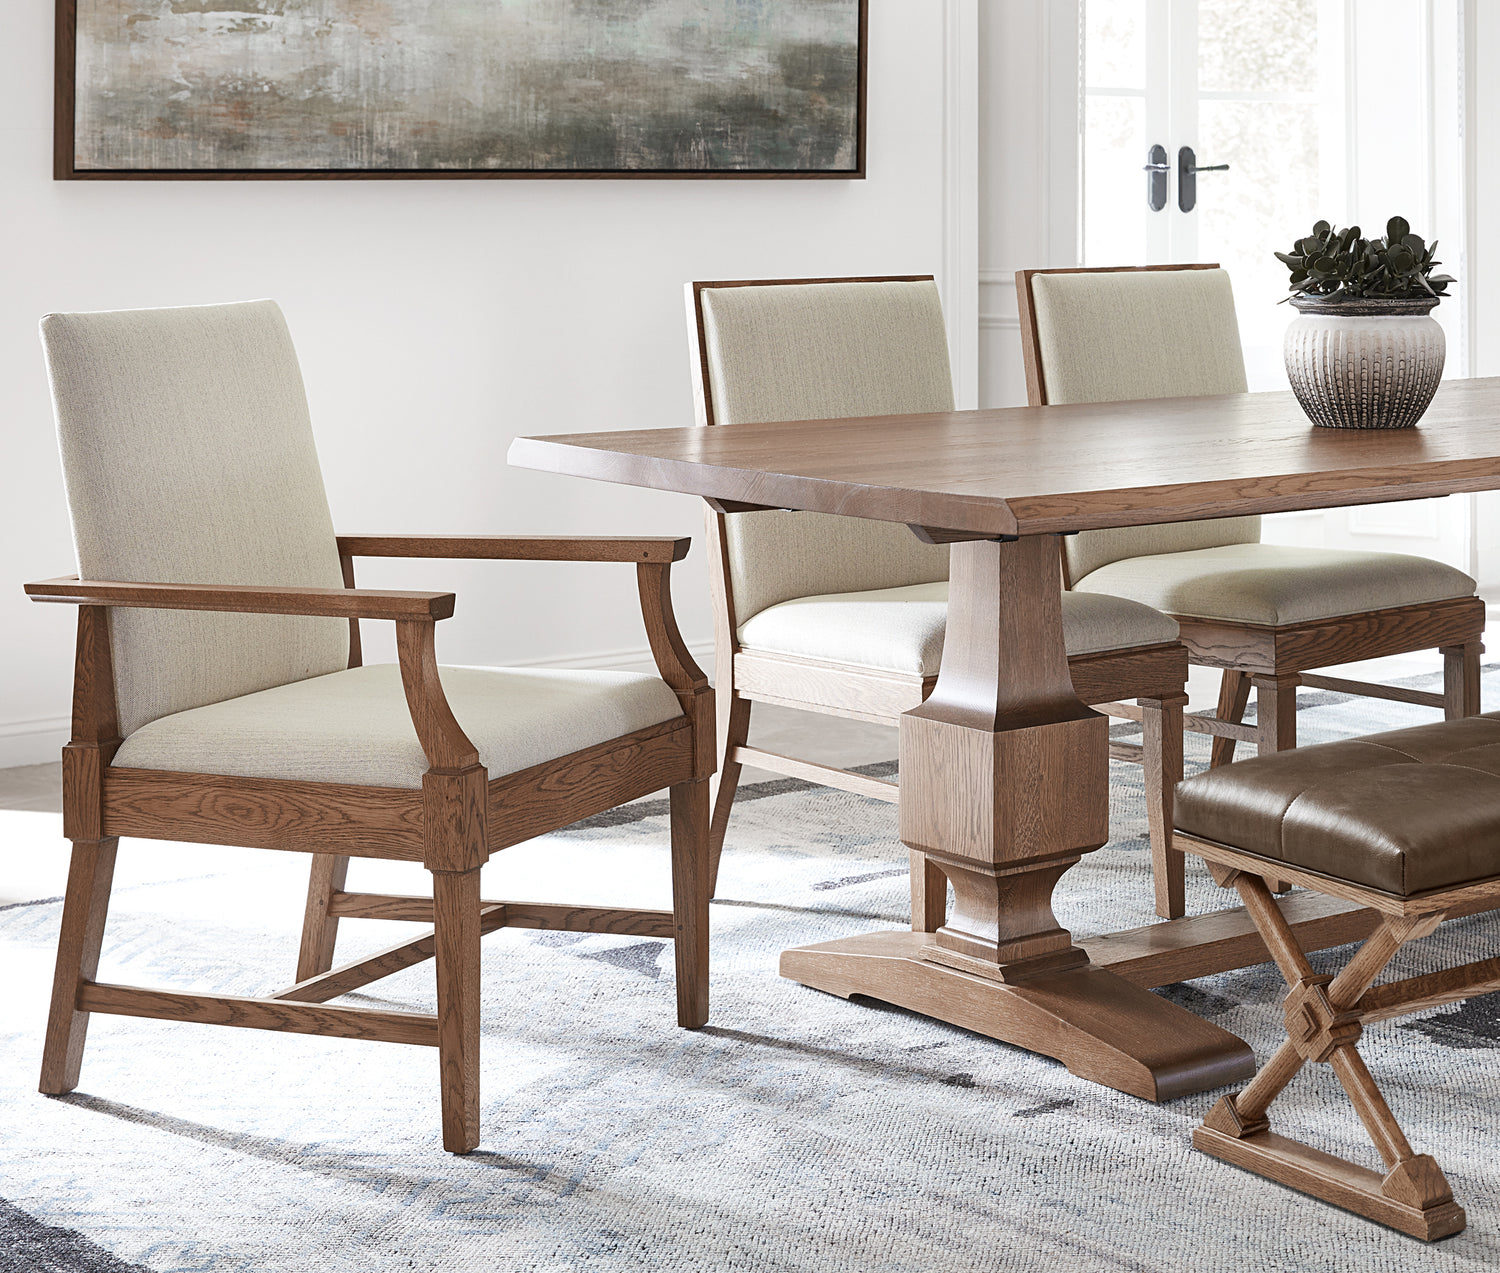 Lifestyle of a St. Lawrence Trestle Table with St. Lawrence Hostess Chair, two Arm Chairs, and a St. Lawrence bench surrounding the table.